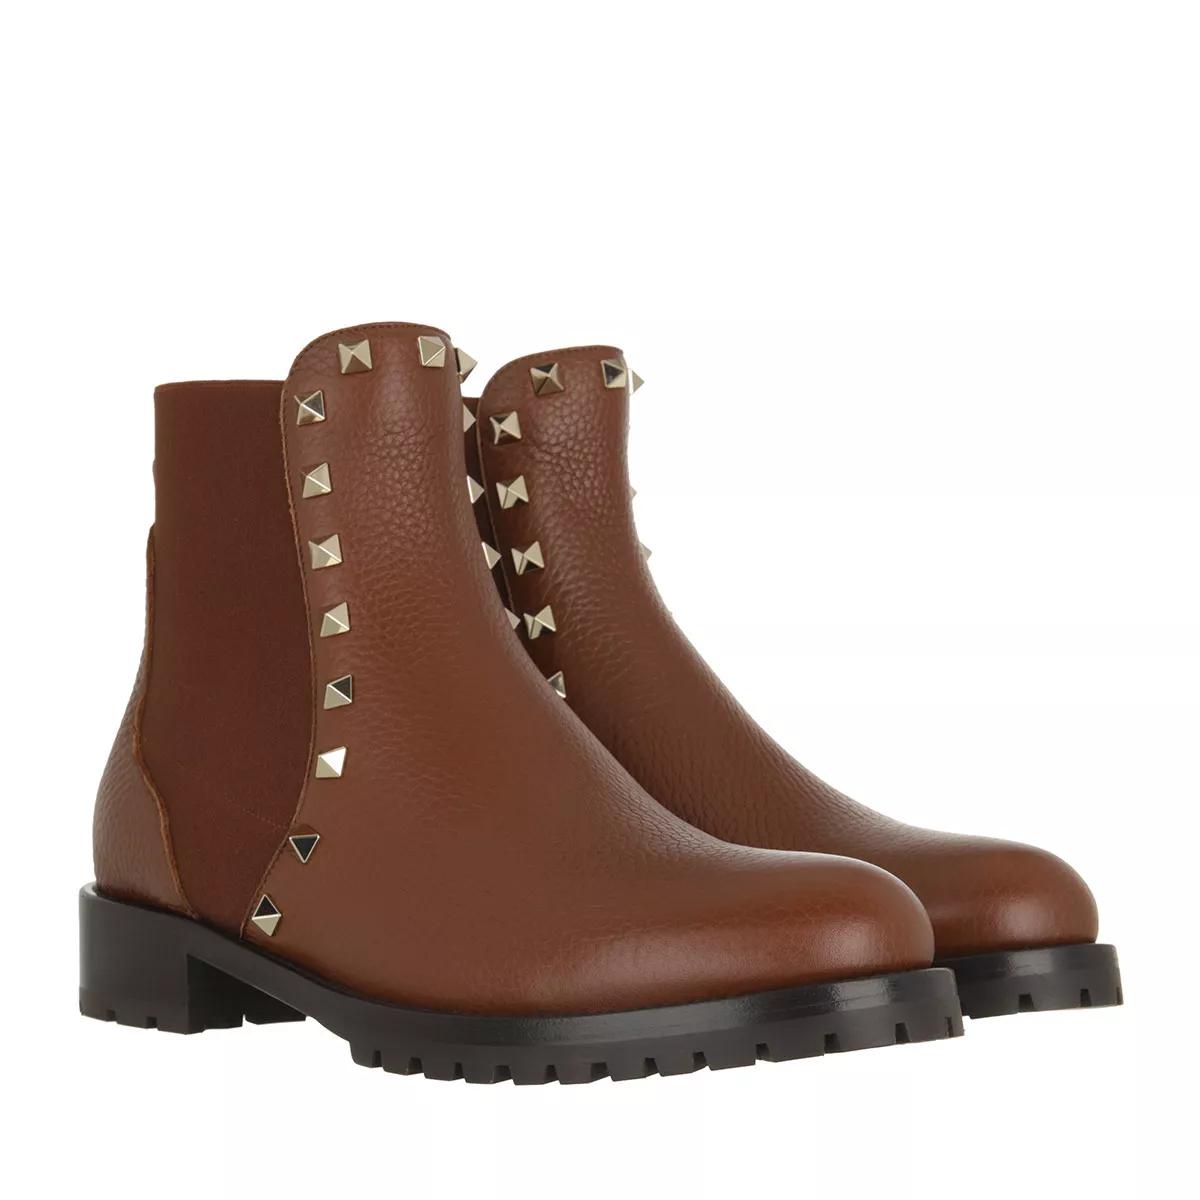 Valentino Rockstud Boots Chocolate Brown Chelsea Boot | fashionette